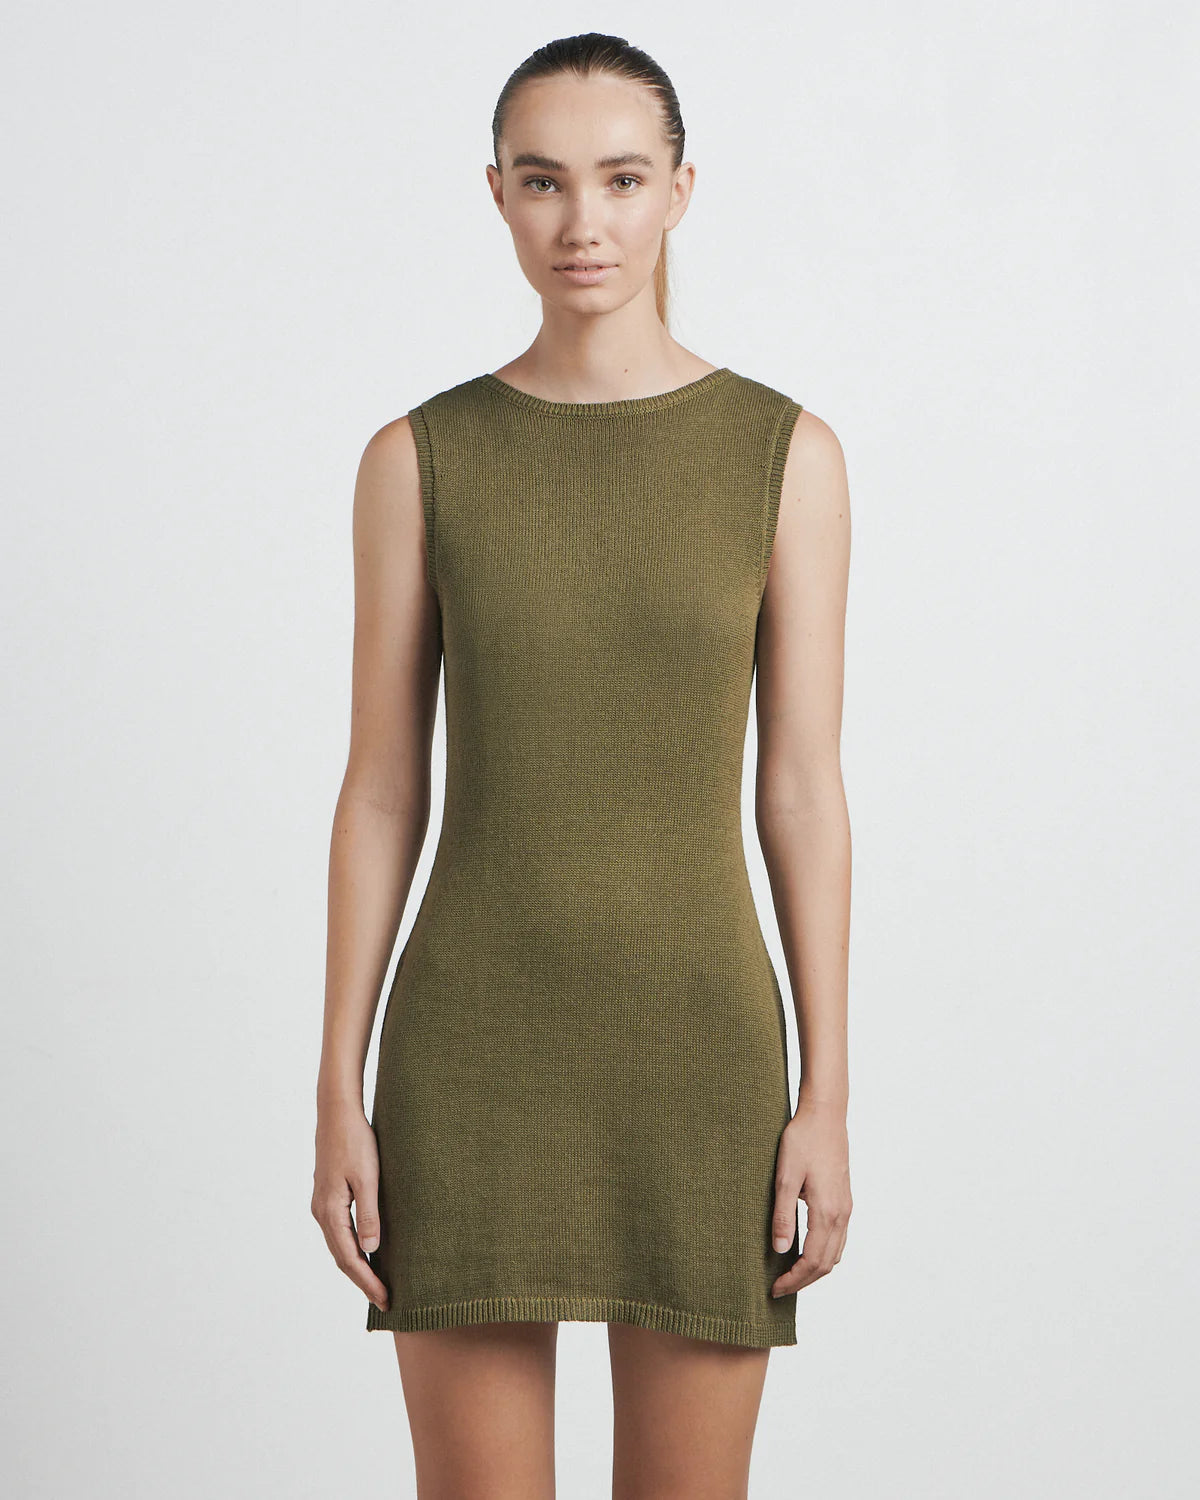 The Knitted Mini Dress